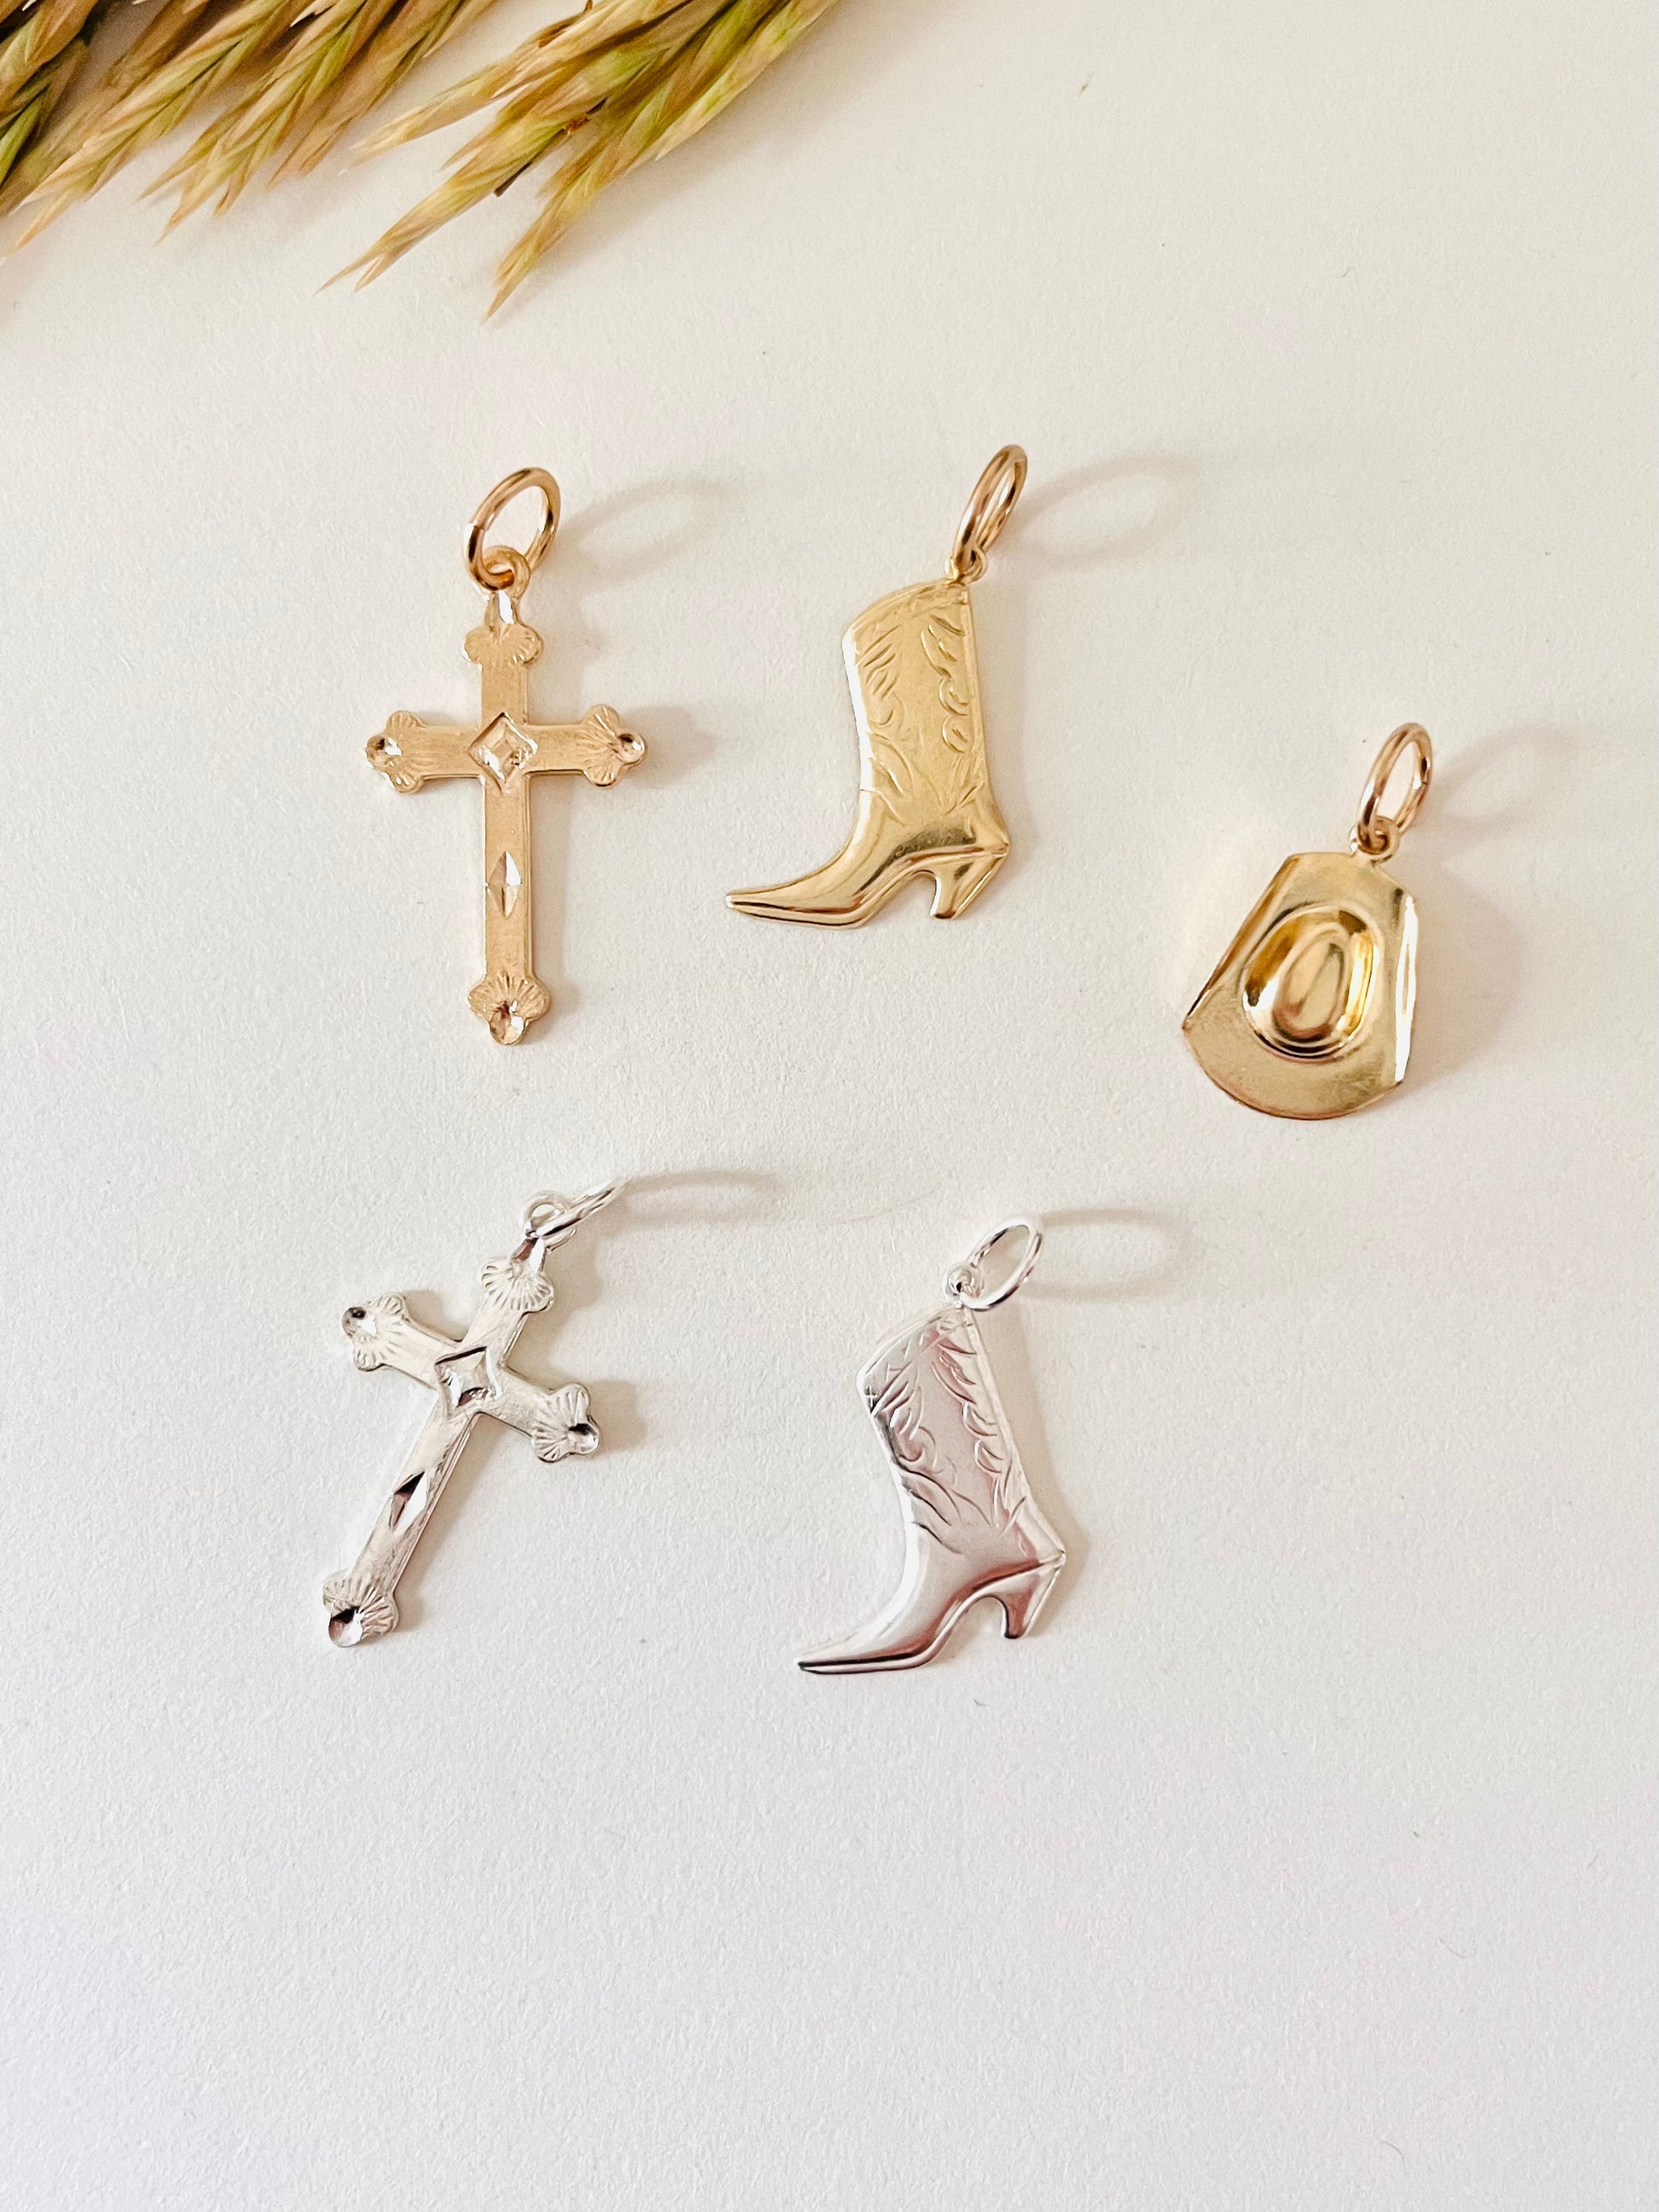 The Cowboy Collection, Cowboy Boot, Cowboy Hat, Cowboy Country Western Charm, Cross, Country Western Charm, Rodeo Cowgirl Jewelry